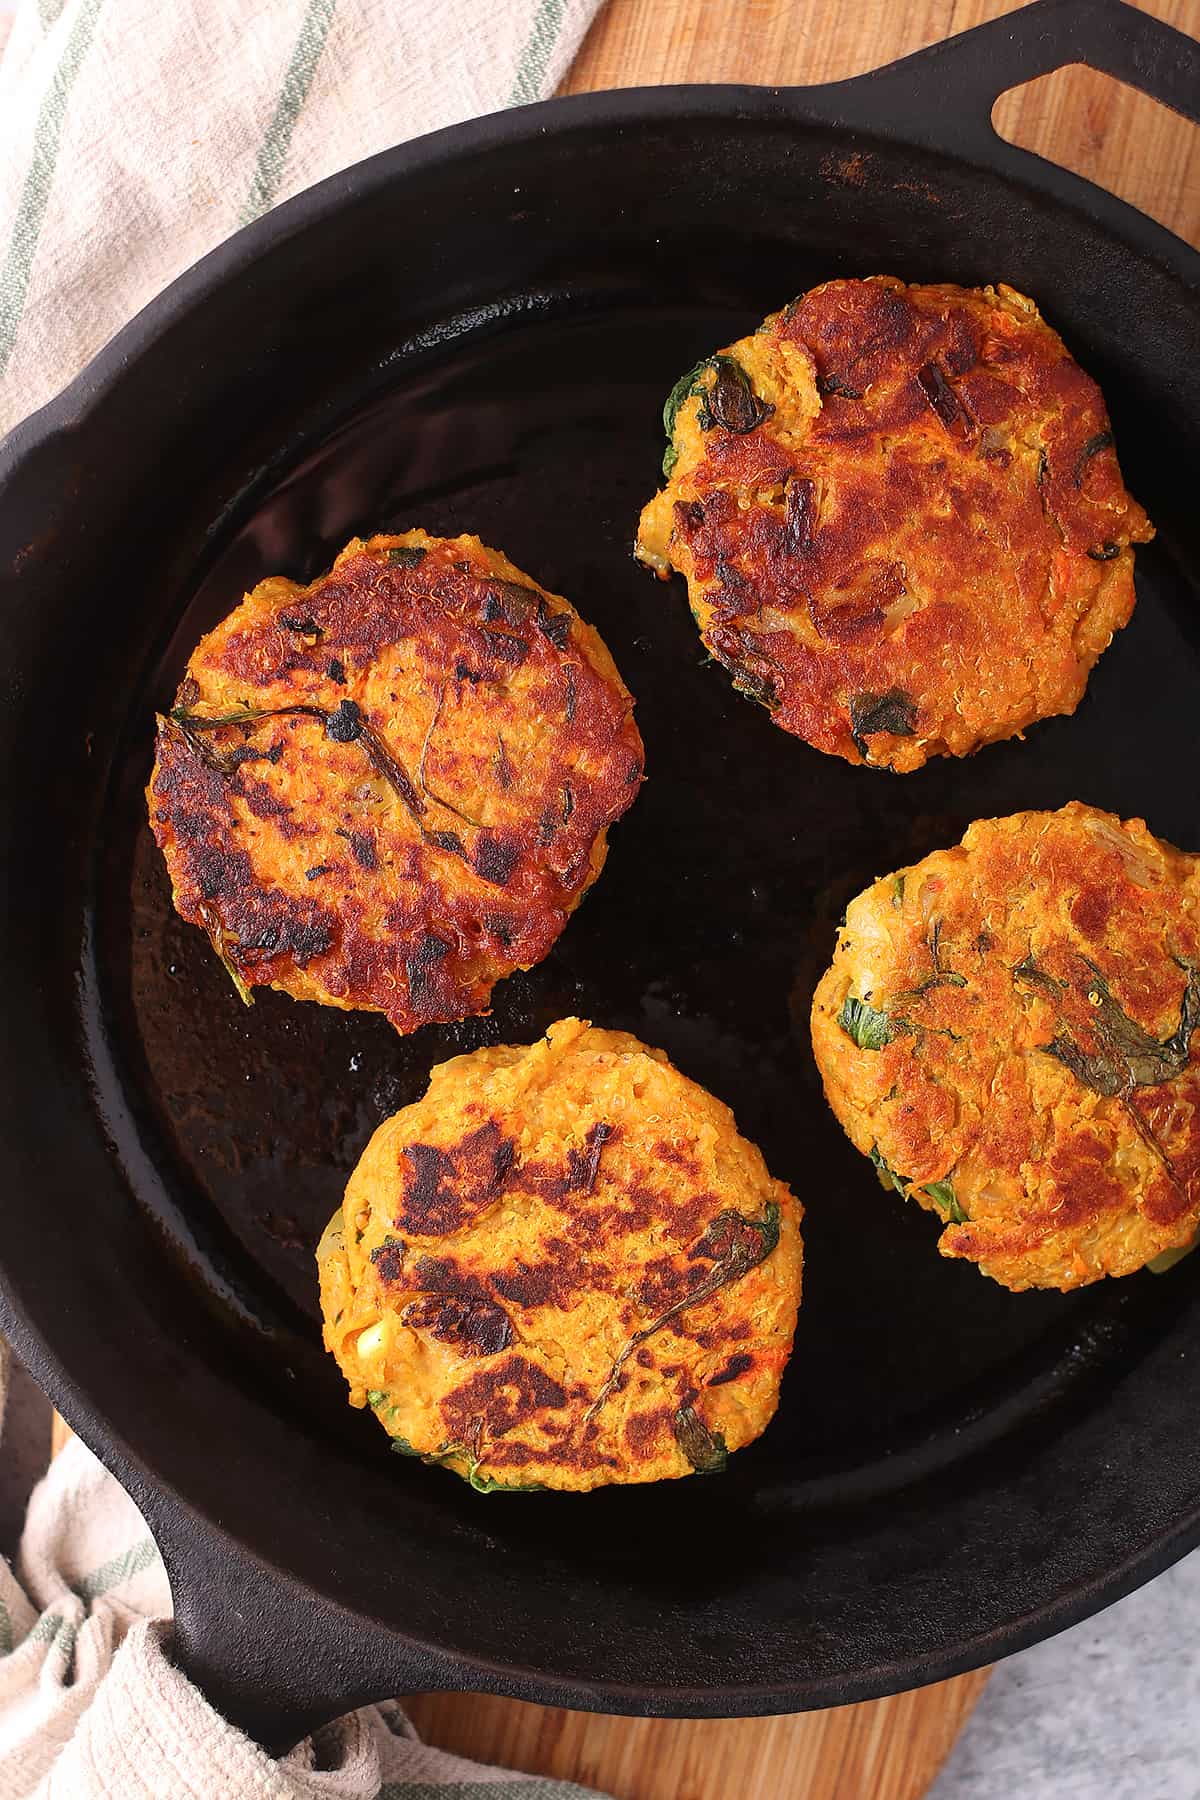 Cooked sweet potato burgers in a cast iron skillet